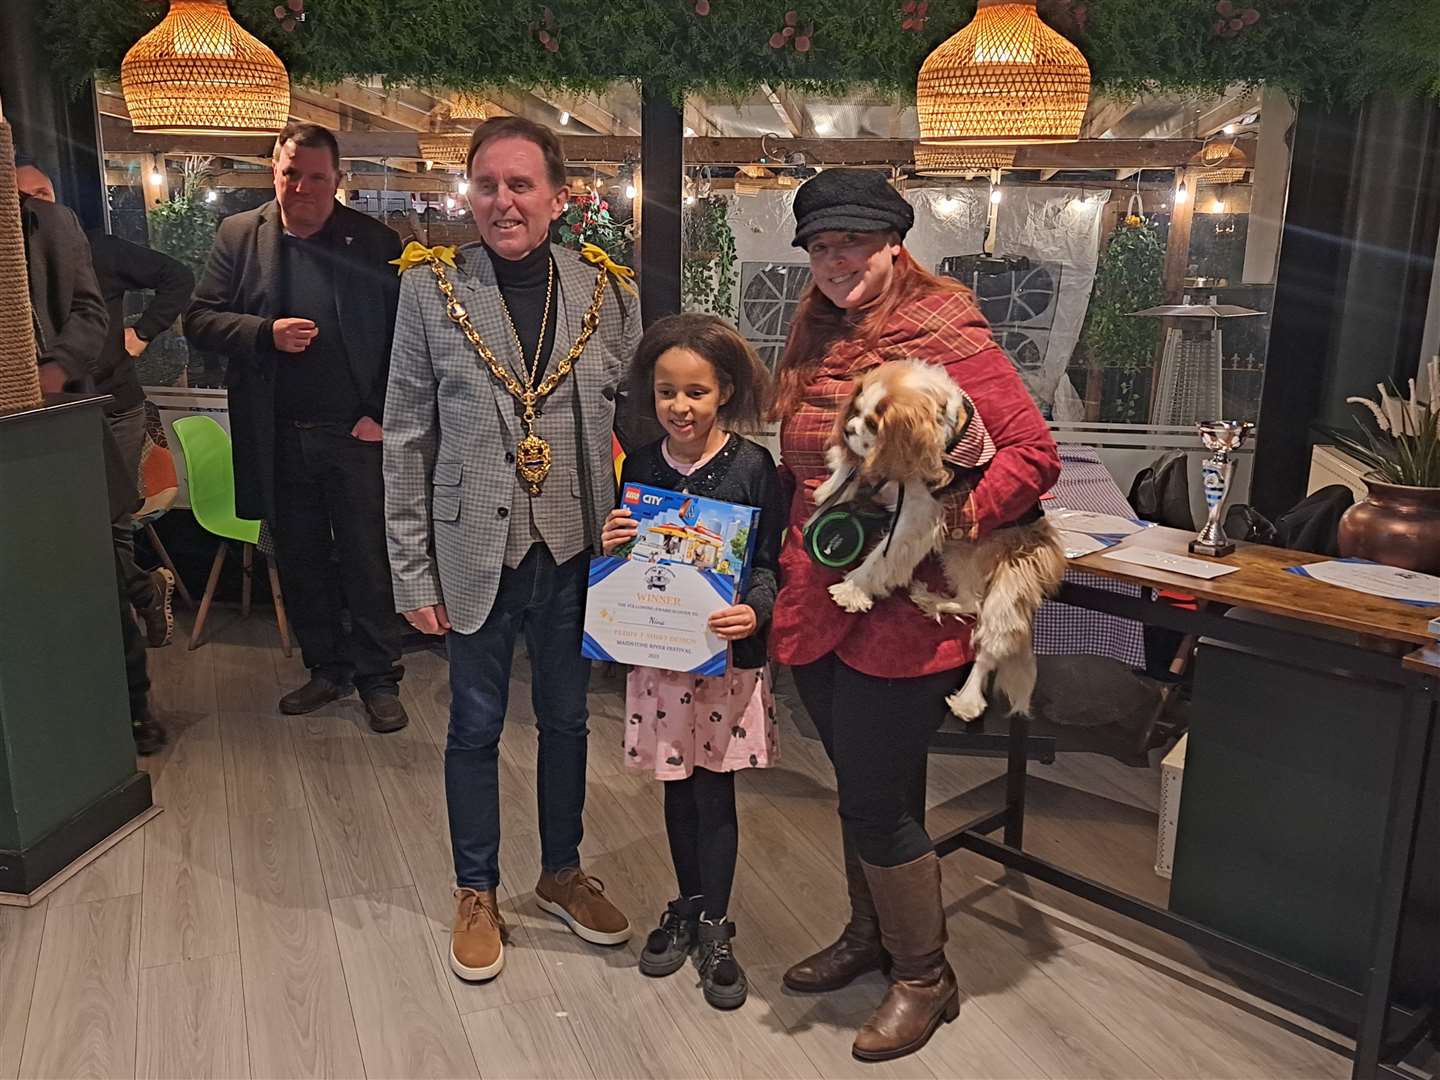 The winner of the T-shirt design competition Nina Mwamdira receives her prize from the Mayor Maidstone Derek Mortimer and committee member Clairey Suzanne, with mascot Peppermint